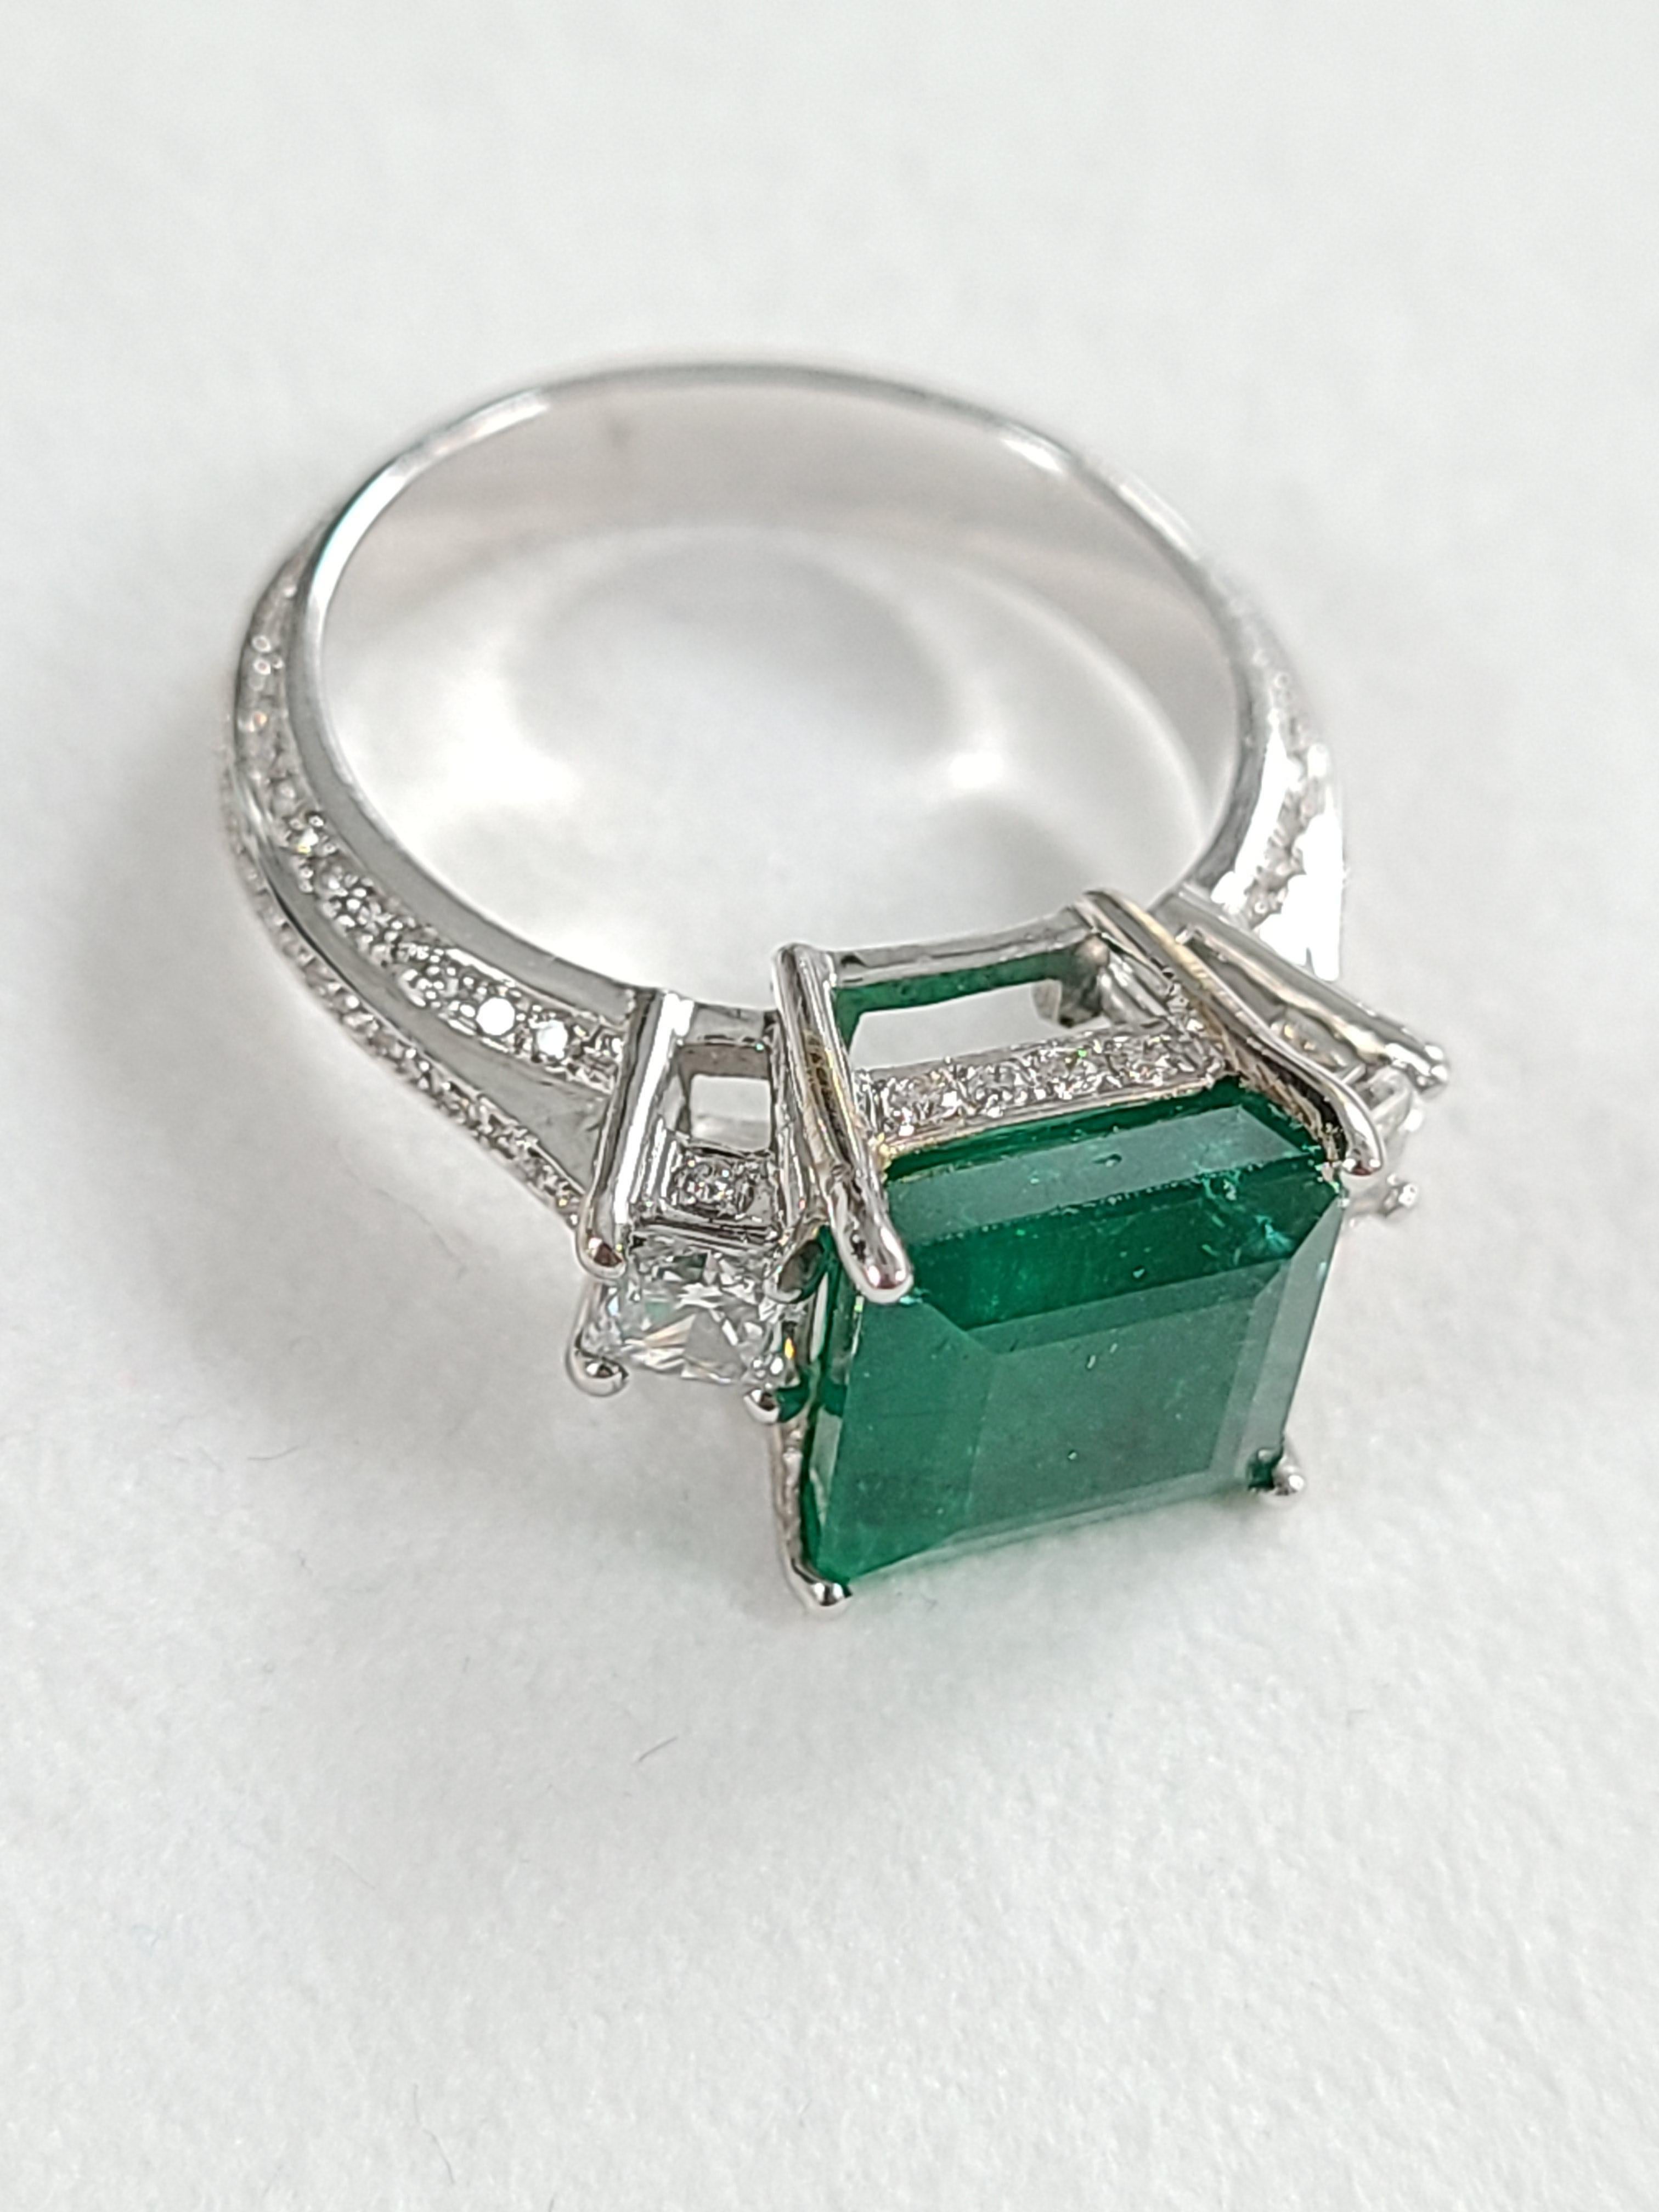 A very wearable, everyday Square Emerald & Princess Diamonds Engagement Ring set in 18K Gold. The weight of the Emerald is 3.97 carats. The Emerald is completely natural without any treatment and originates from Zambia. The combined weight of the